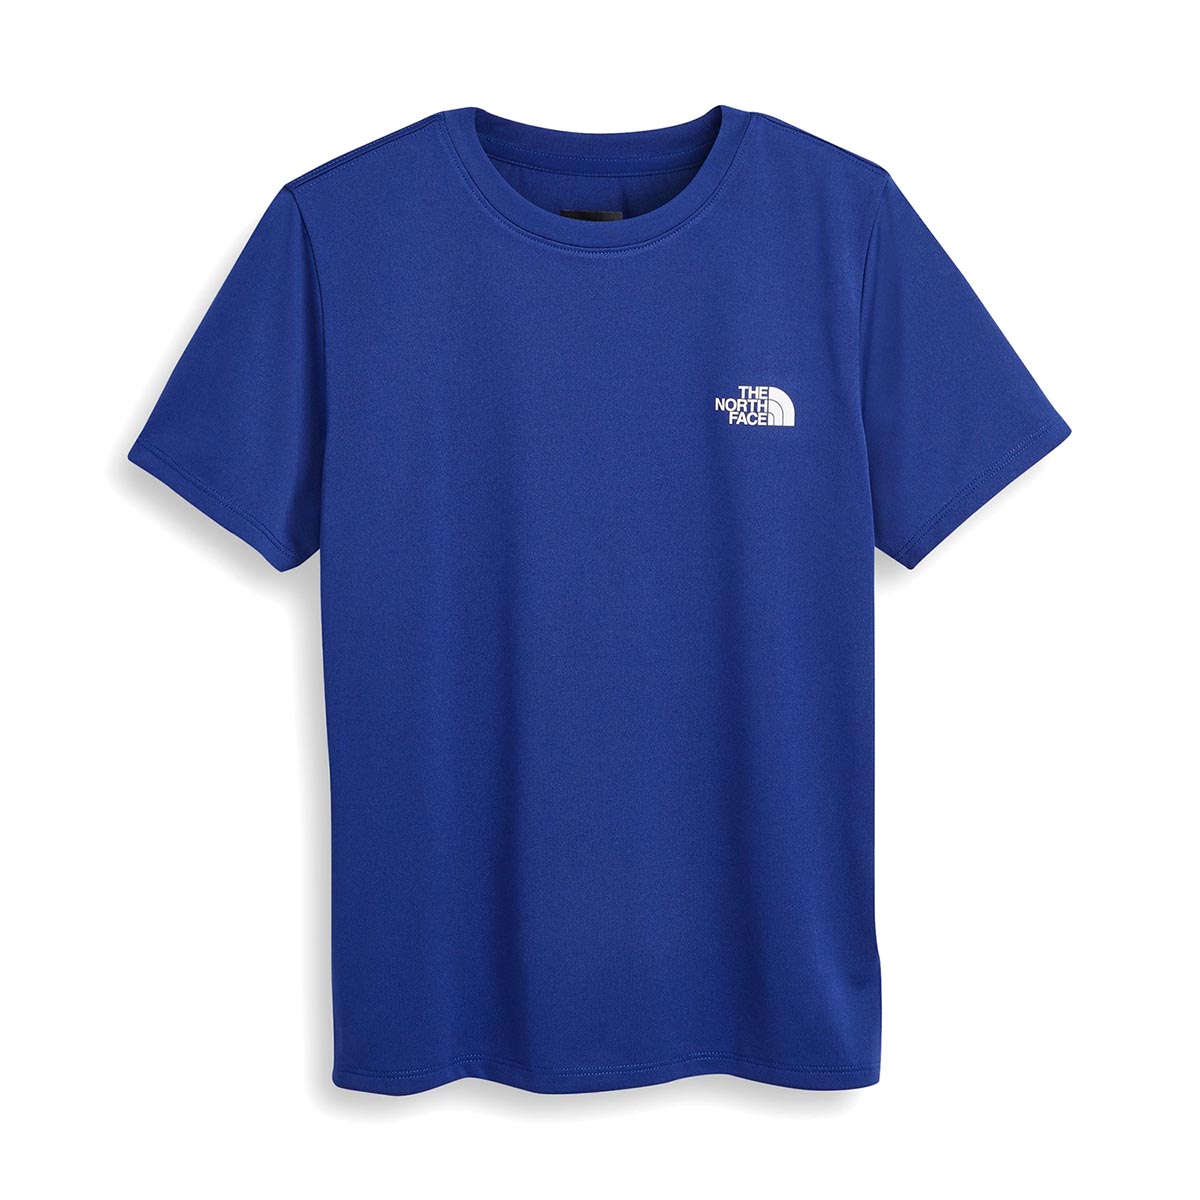 THE NORTH FACE - REACTOR T-SHIRT